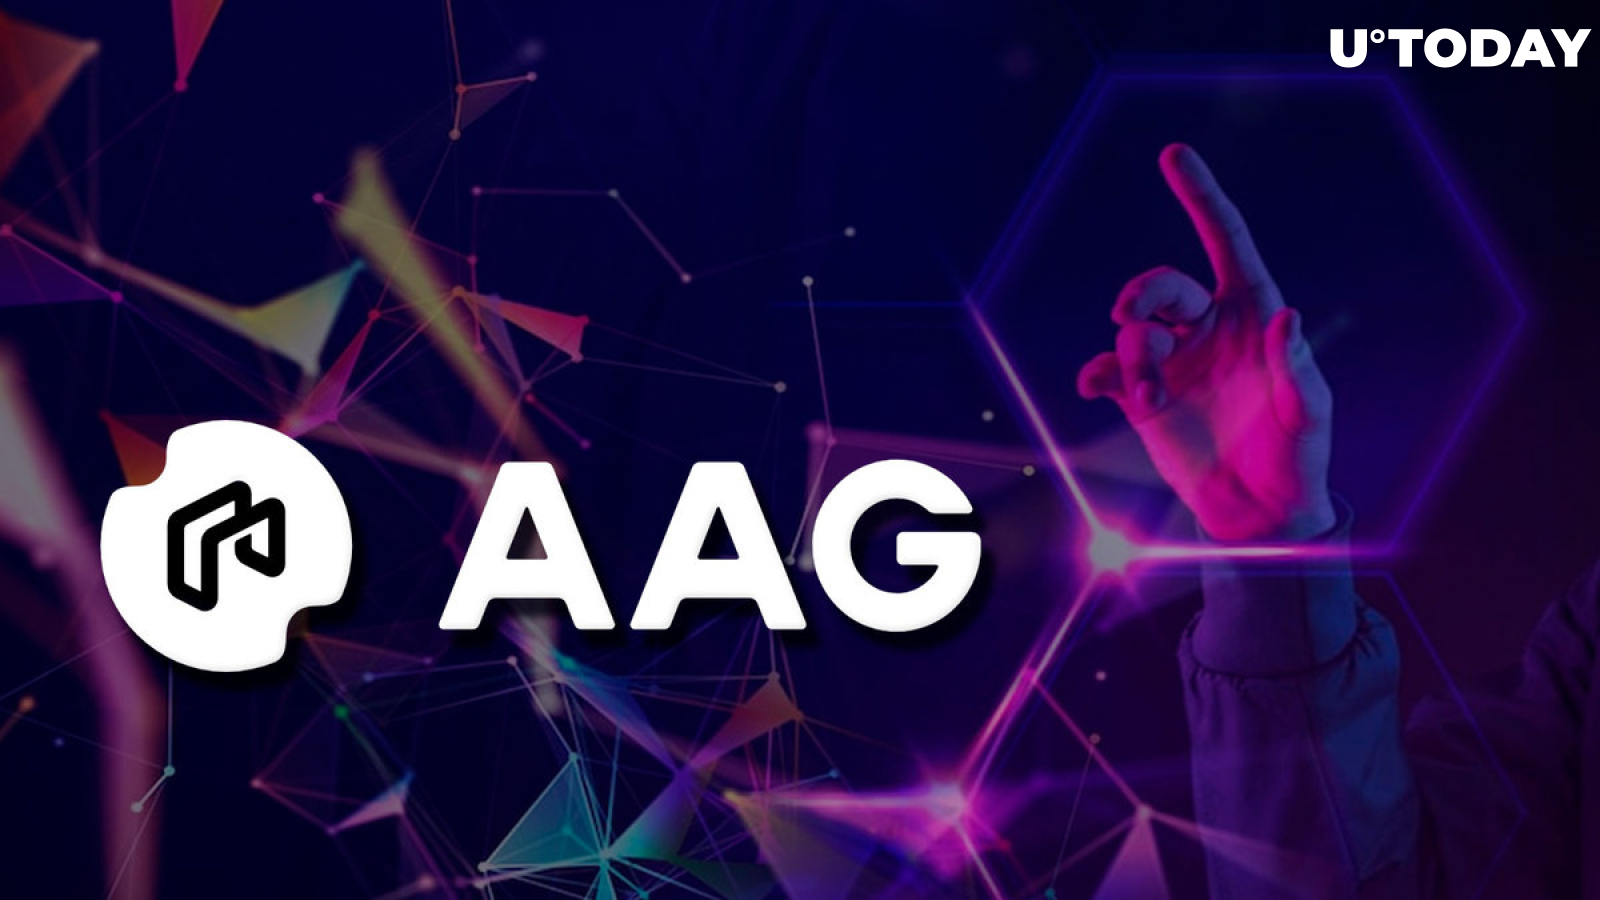 AAG Ventures Rebrands to AAG, Expands Its Bet on Metaverse